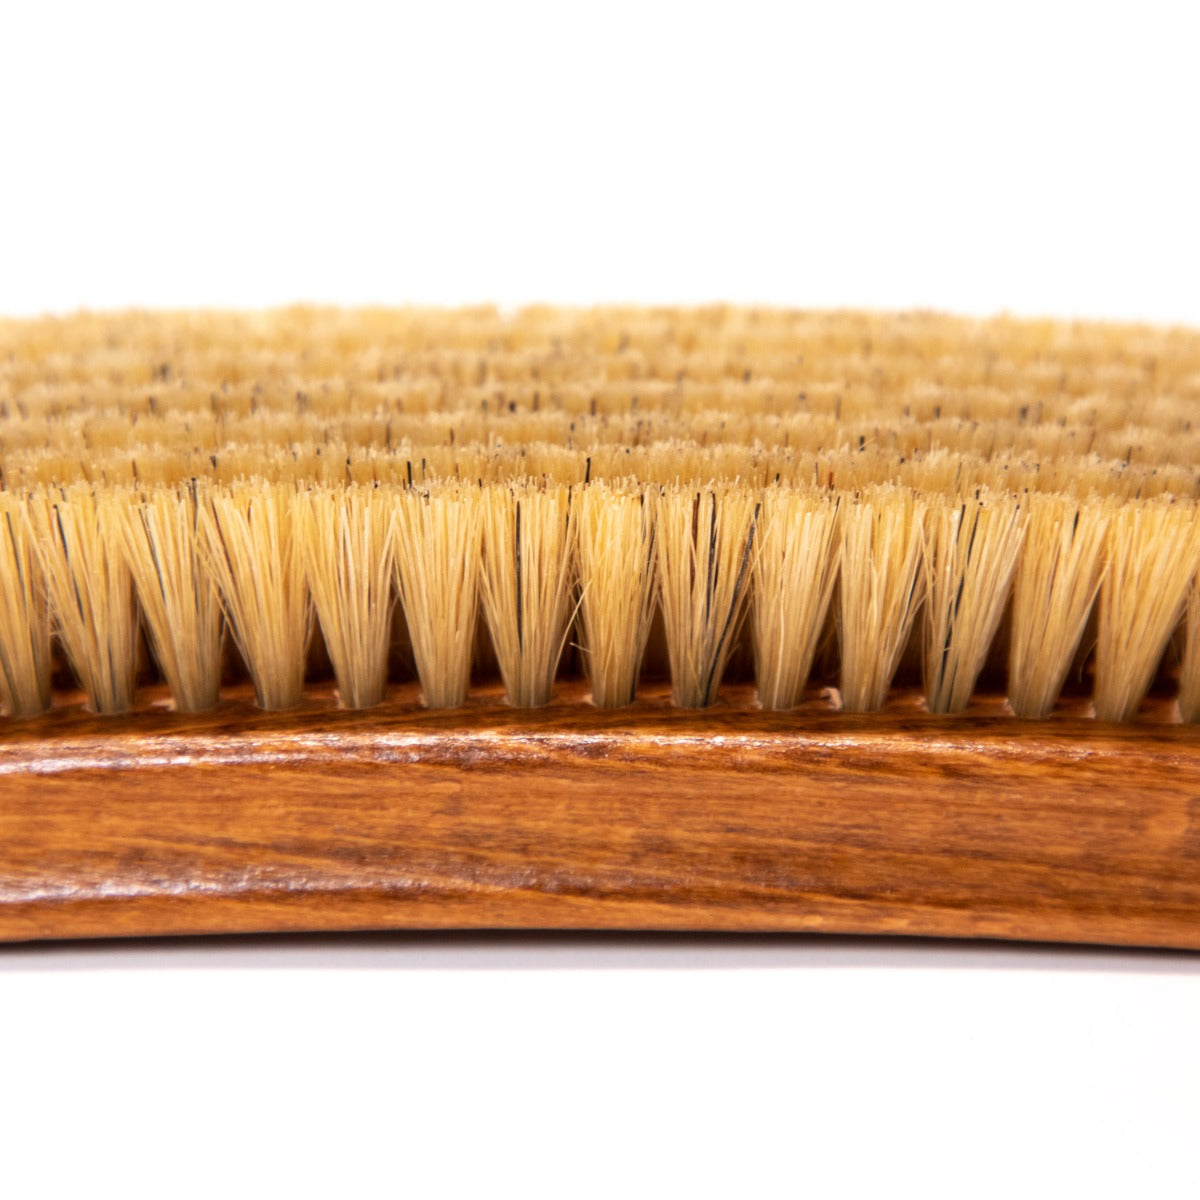 A Wellington Deluxe Pig Bristle Suede Cleaning Brush with brown bristles from KirbyAllison.com.